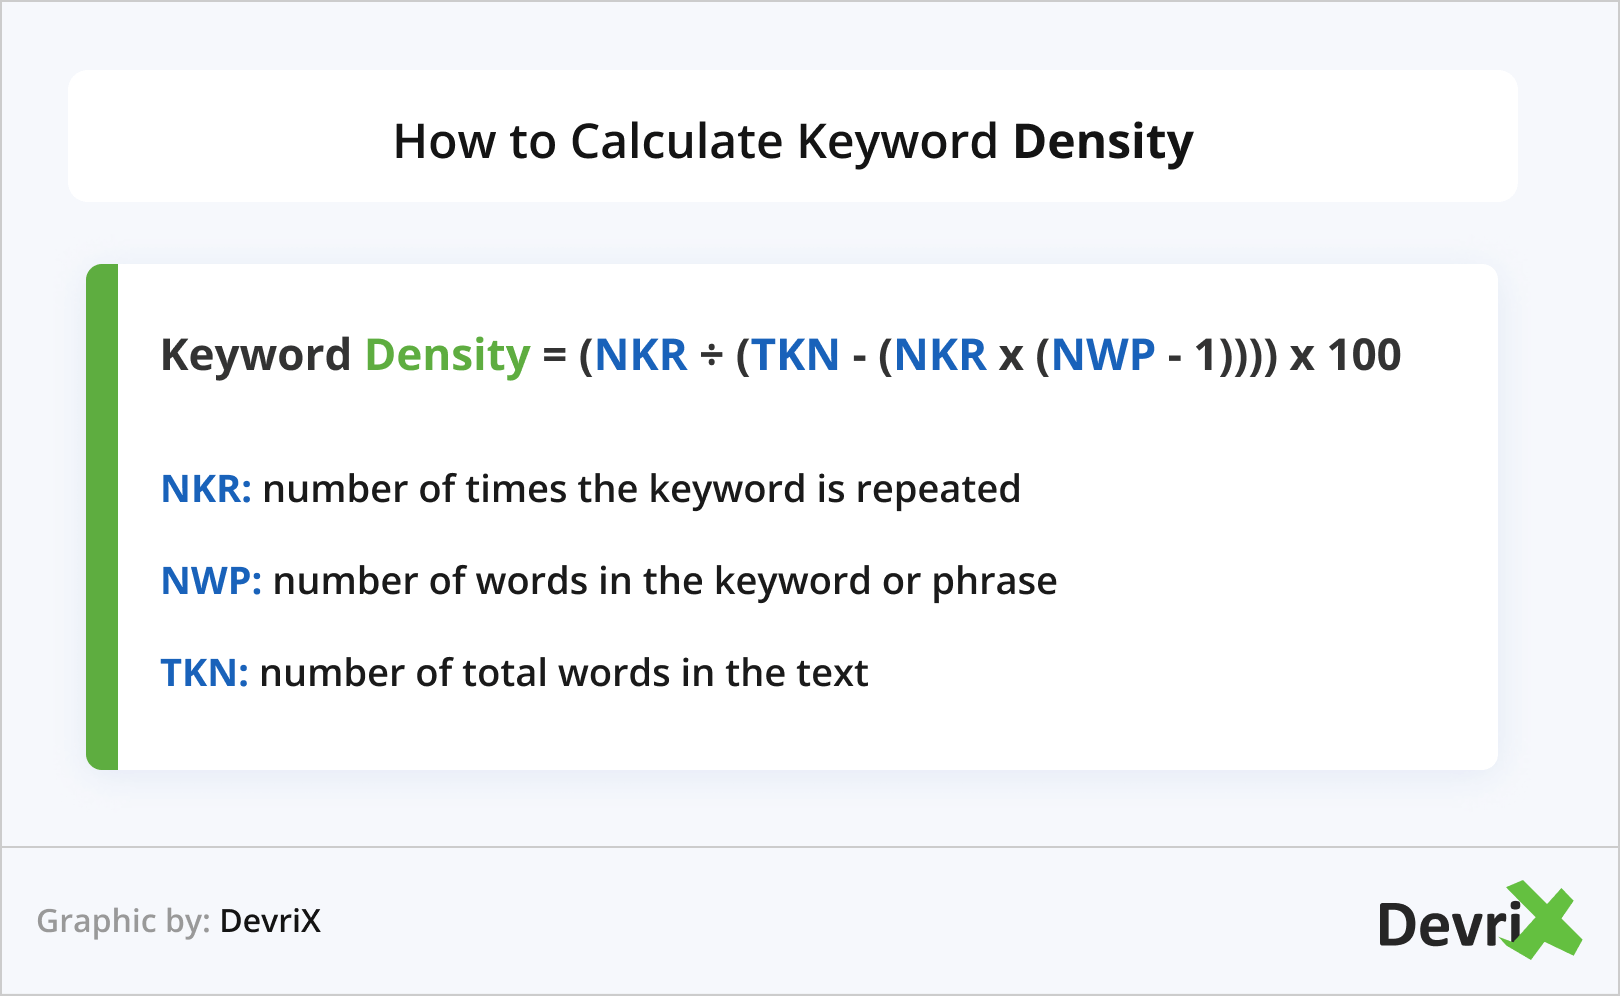 How to Calculate Keyword Density